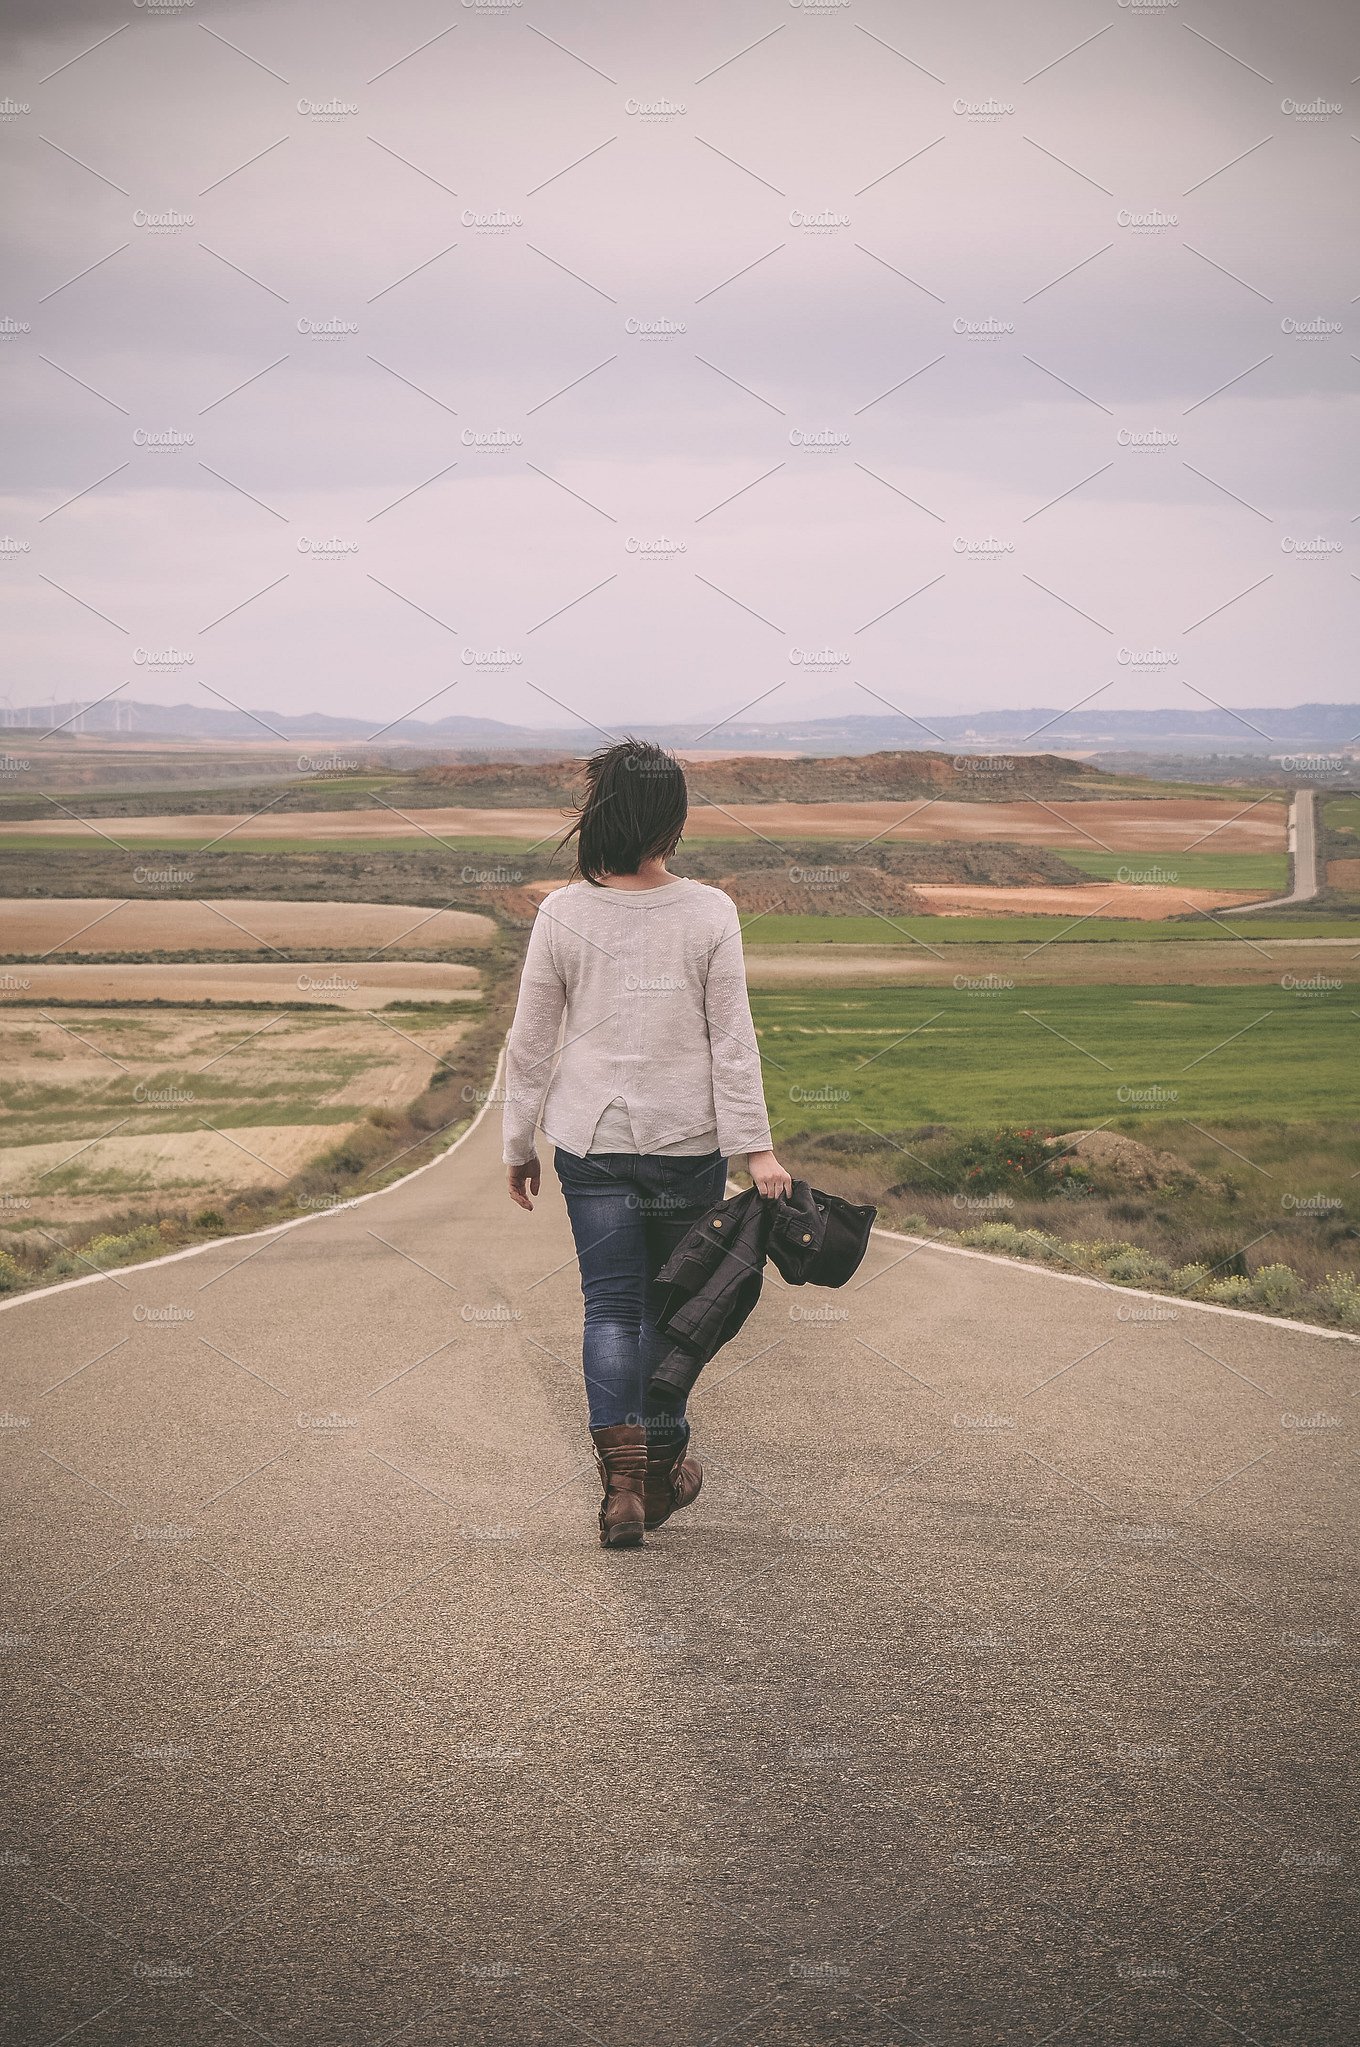 Woman walking alone in a road ~ People Photos ~ Creative Market